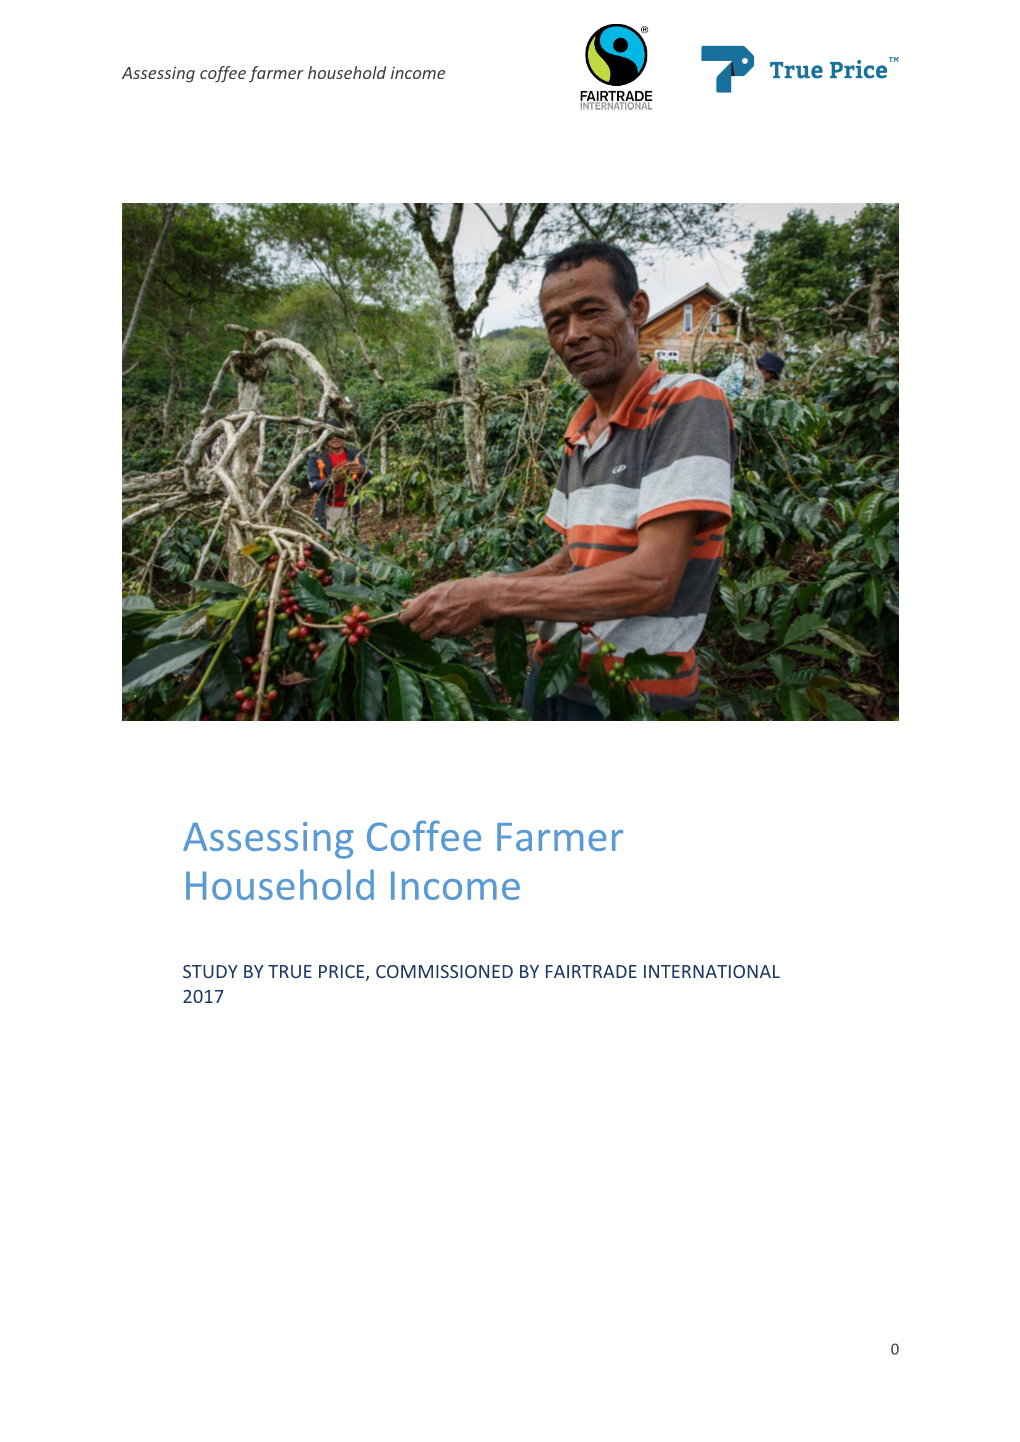 Assessing Coffee Farmer Household Income